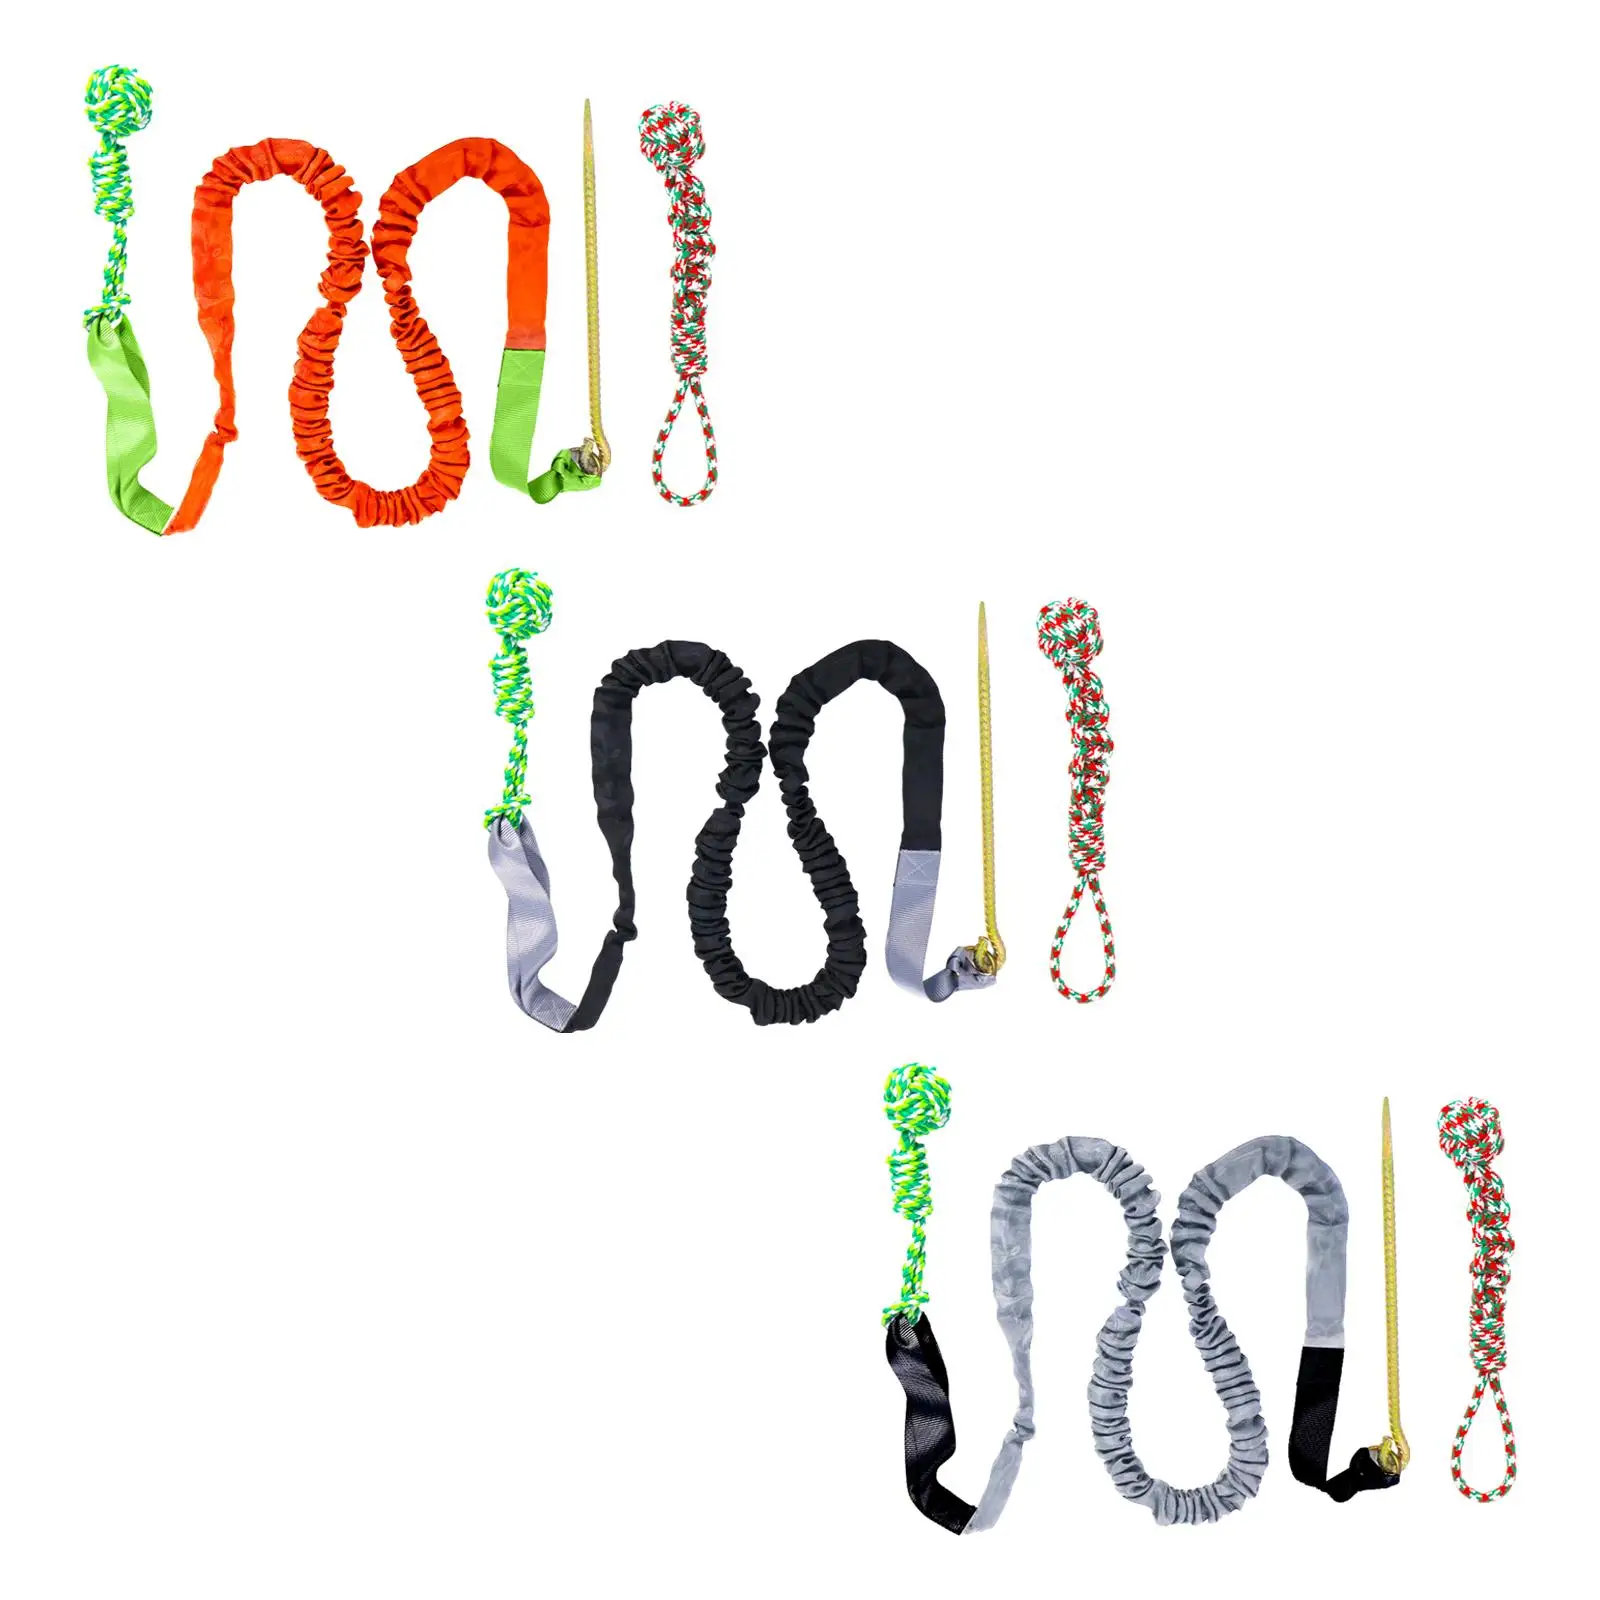 Dog Bungee Toy Dog Chewing Bite Resistant Pet Training Pet Dog Toy Dog Bungee Hanging Toy for Small Medium and Large Dogs